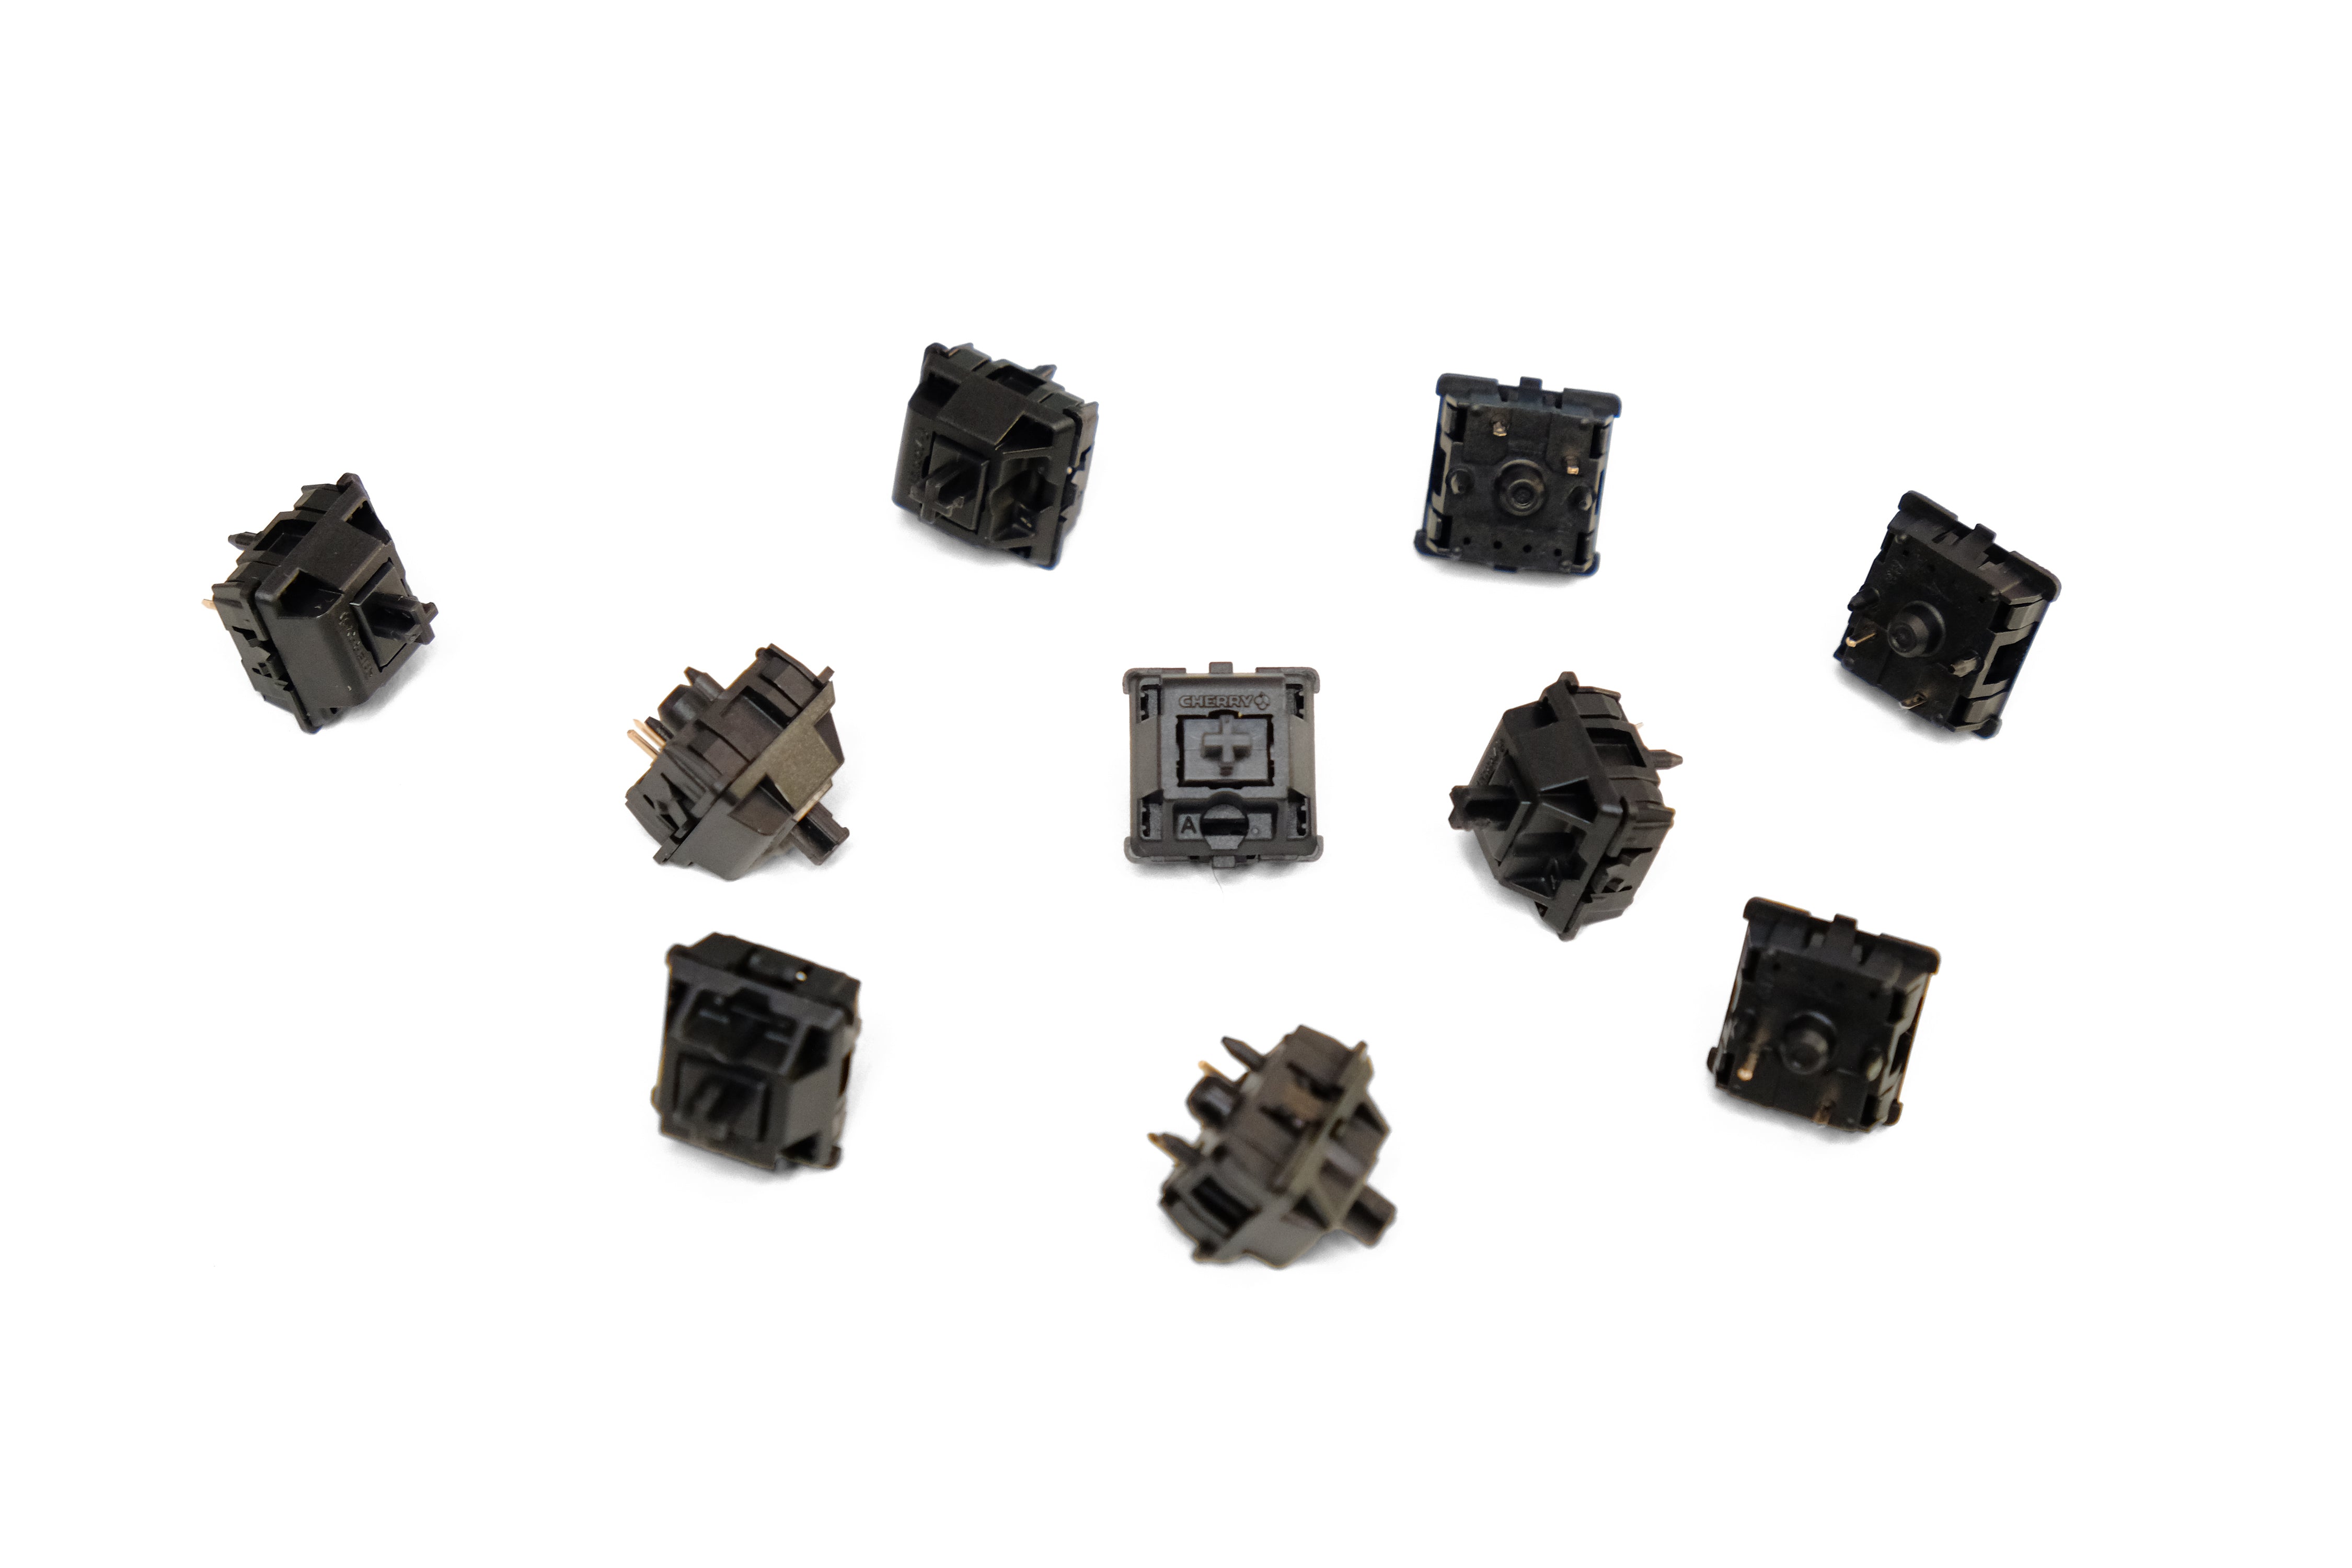 Cherry MX Hyperglide Linear Switches - KeebsForAll